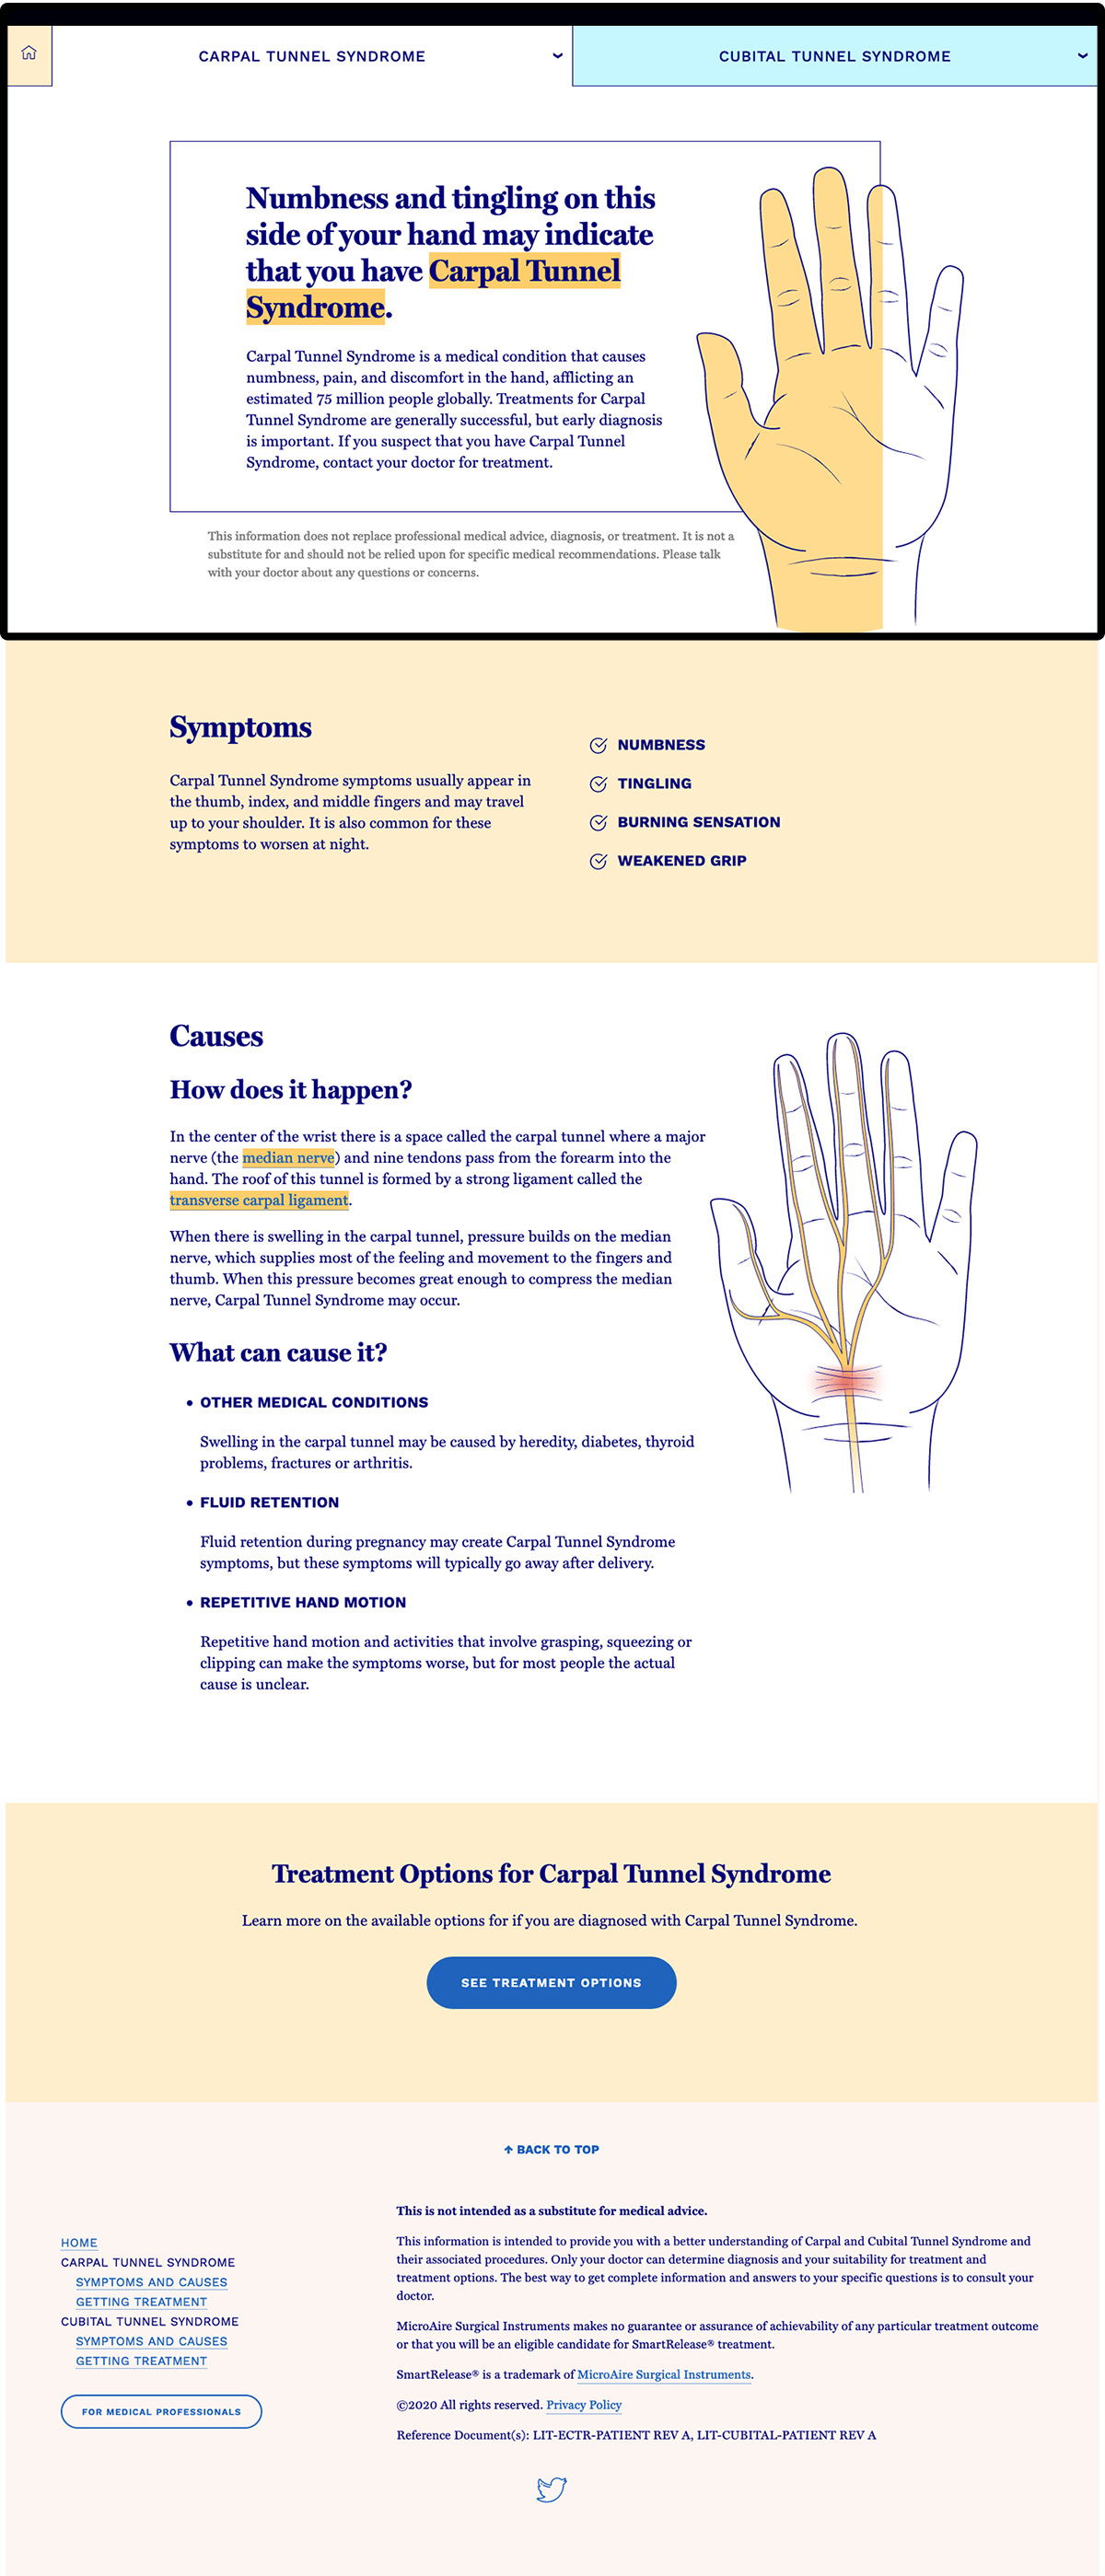 full webpage view of carpal tunnel website